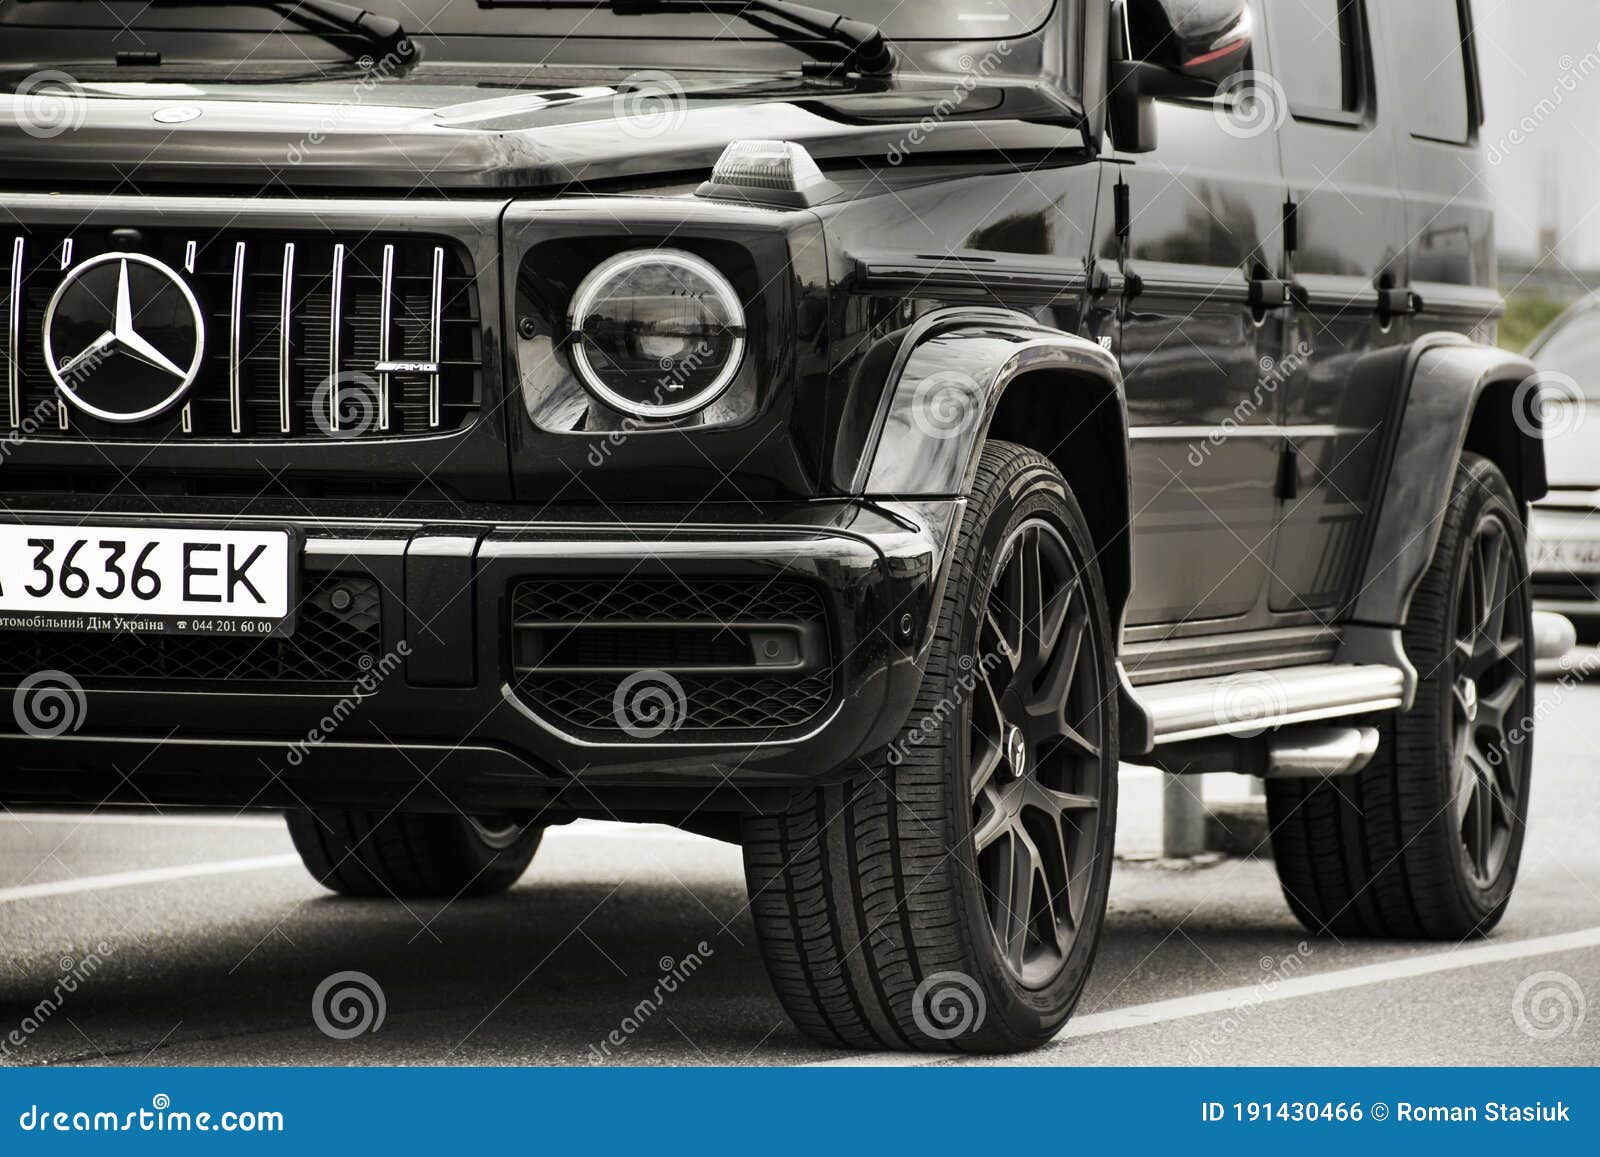 Kiev Ukraine May 19 Mercedes Benz G Class Amg In The City Parked Car Black Suv Editorial Photo Image Of Headlights Radio